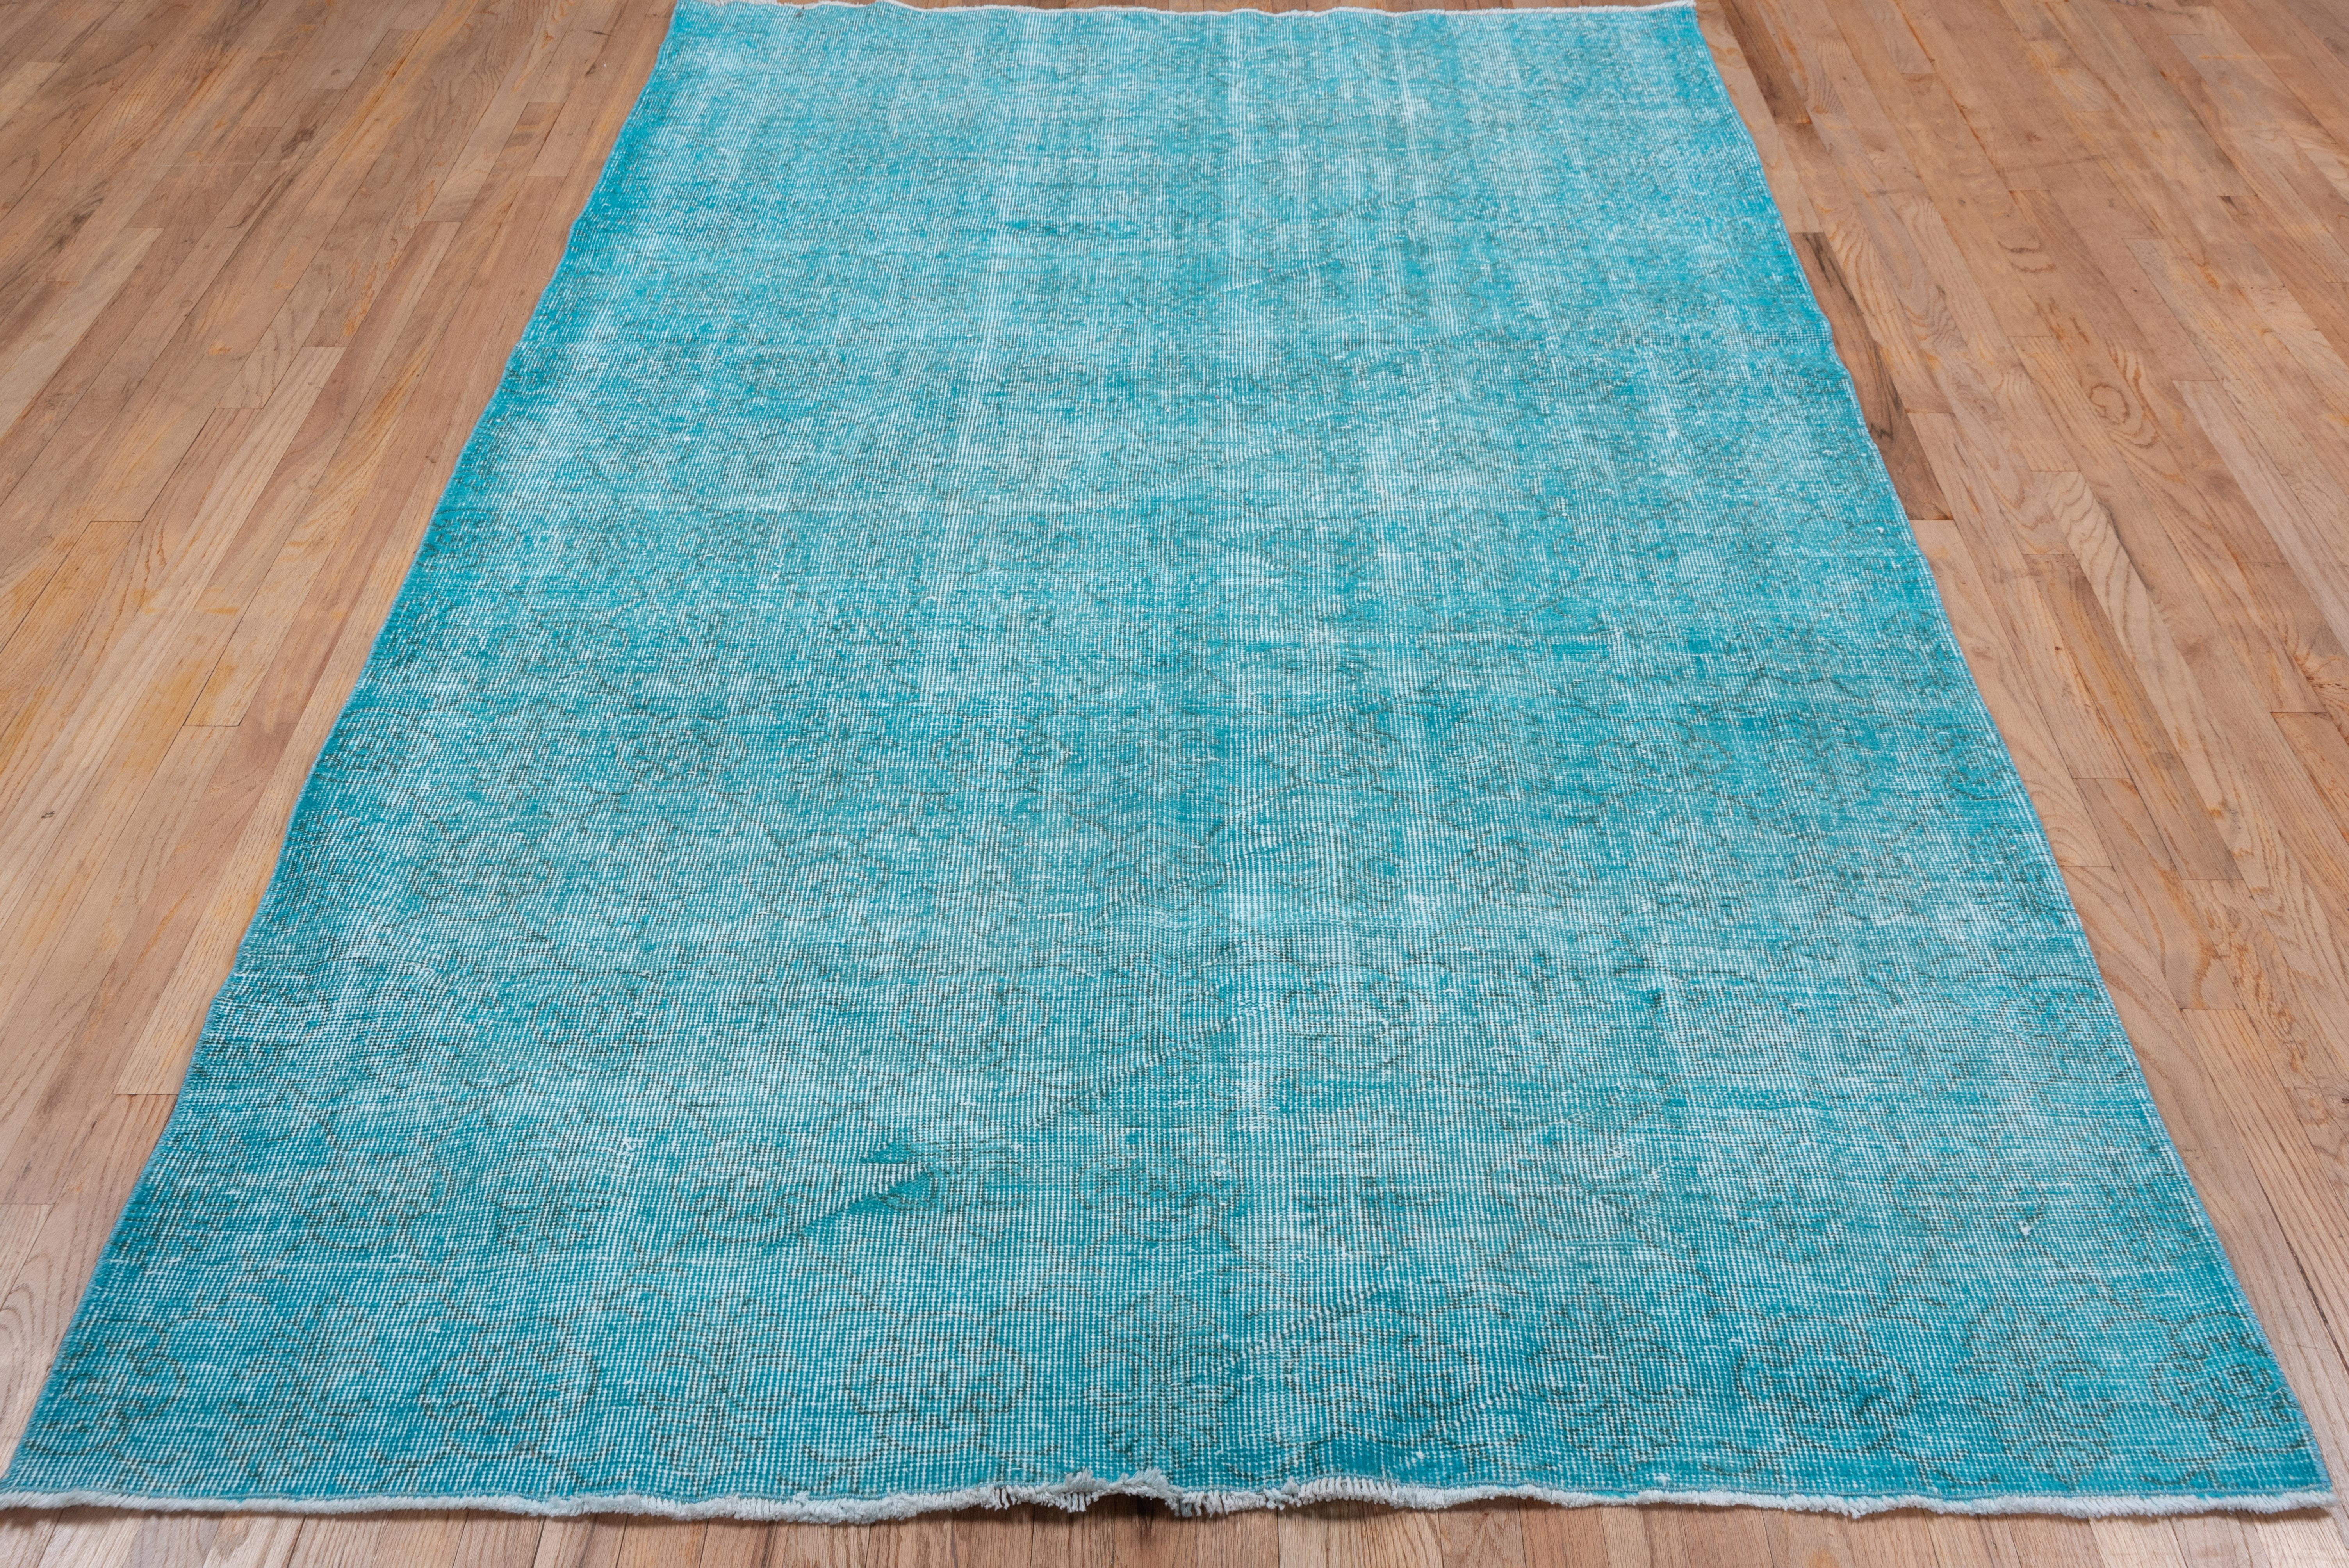 Turkish Vintage Bright Turquoise Overdyed Wool Rug, Shabby Chic For Sale